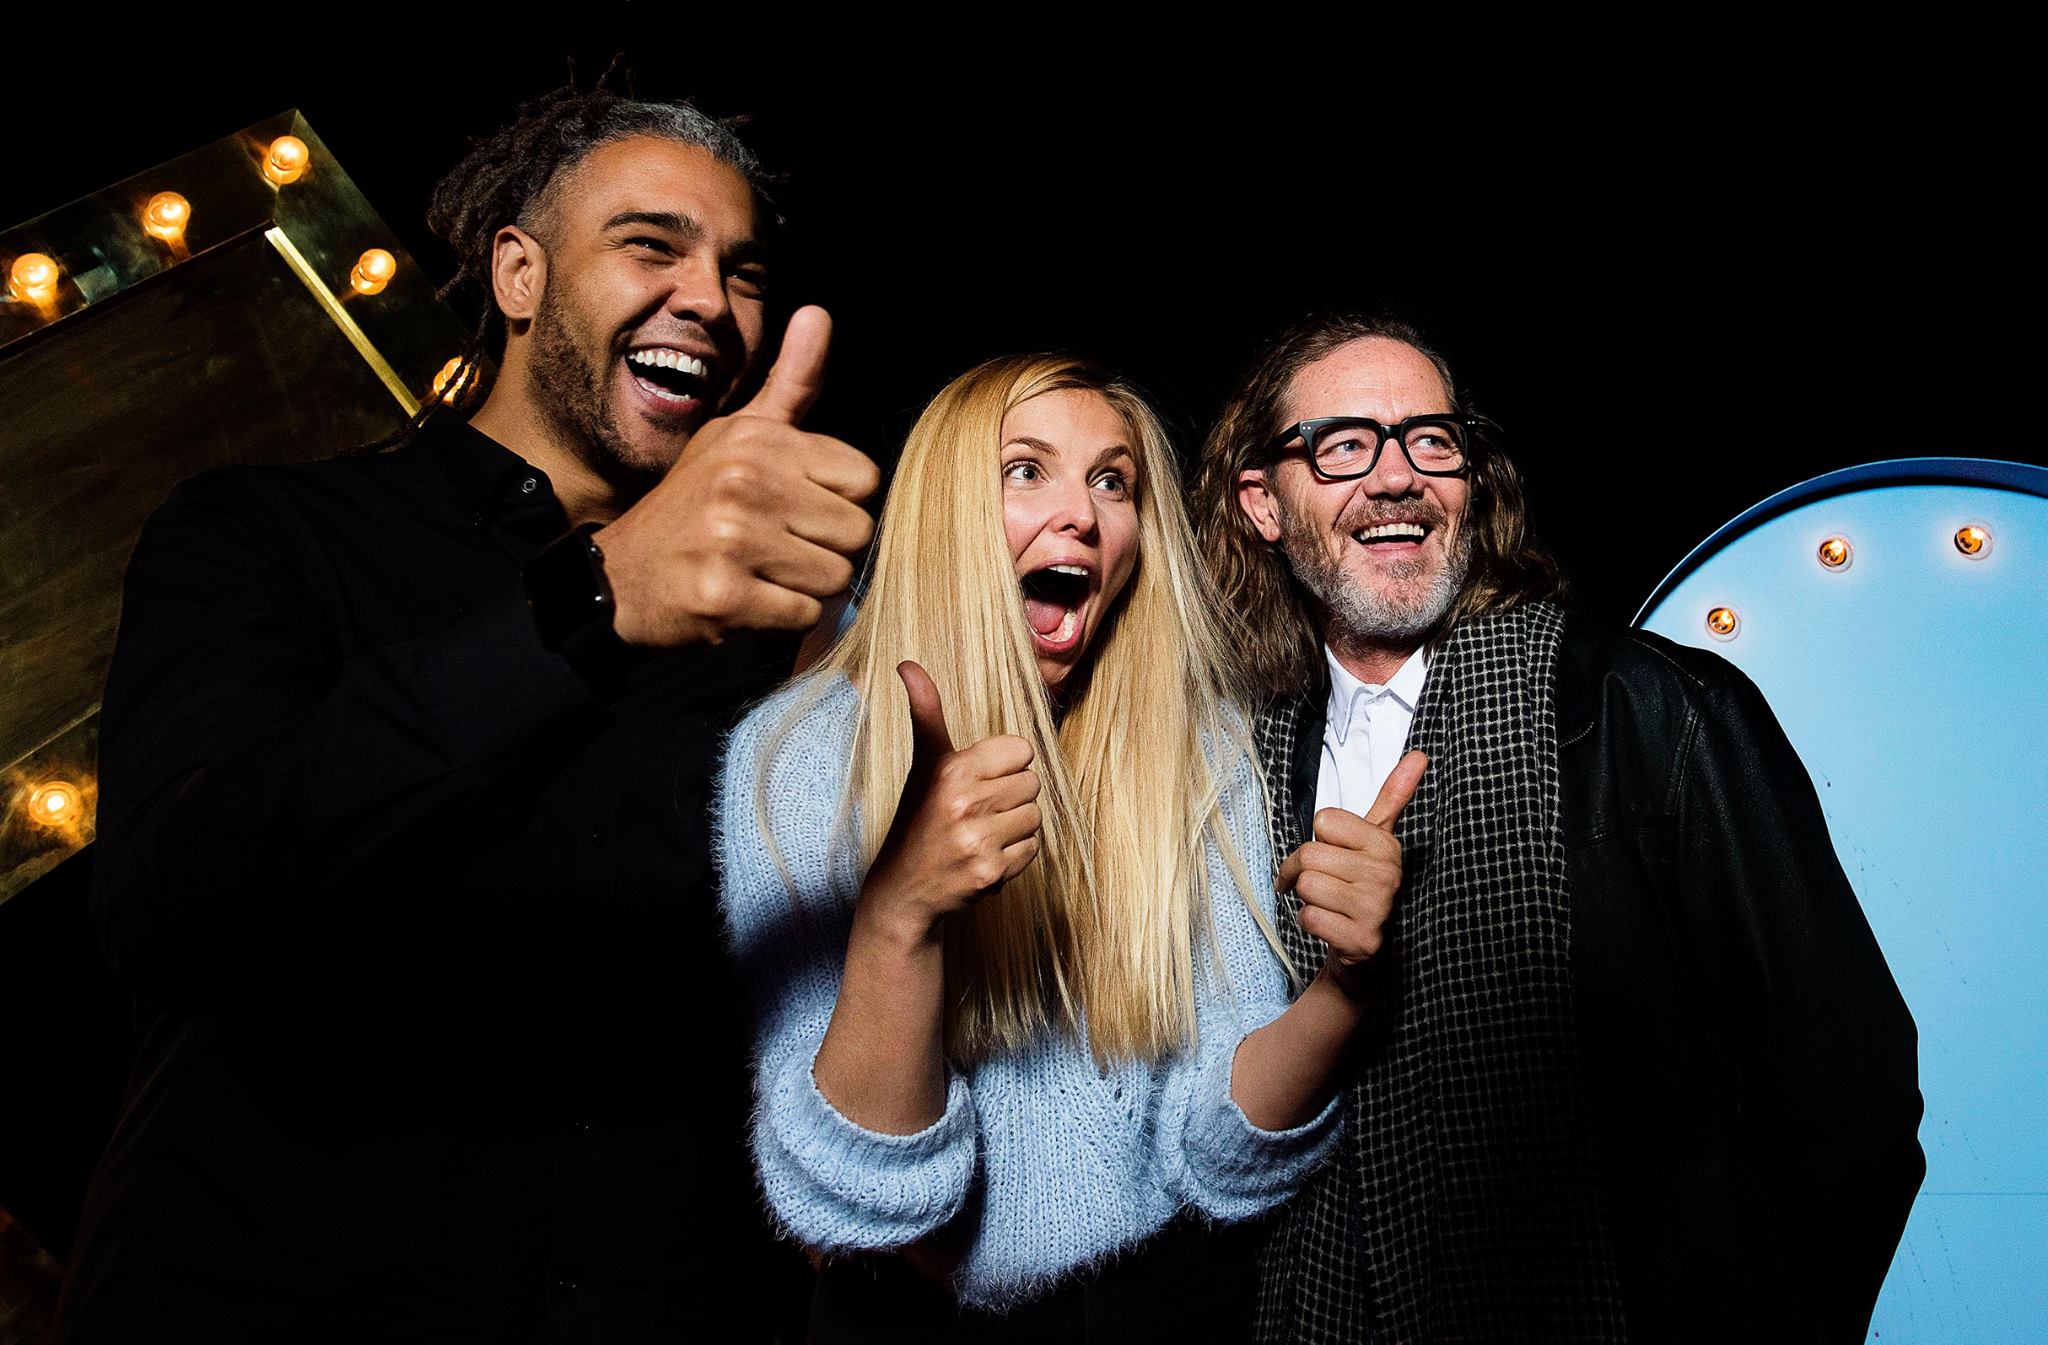 Jason Mante, Winner Claudia Pickering and Michael Laverty at the #TROPVINE party at The X Studio in Potts Point on August 12, 2015 in Sydney, Australia